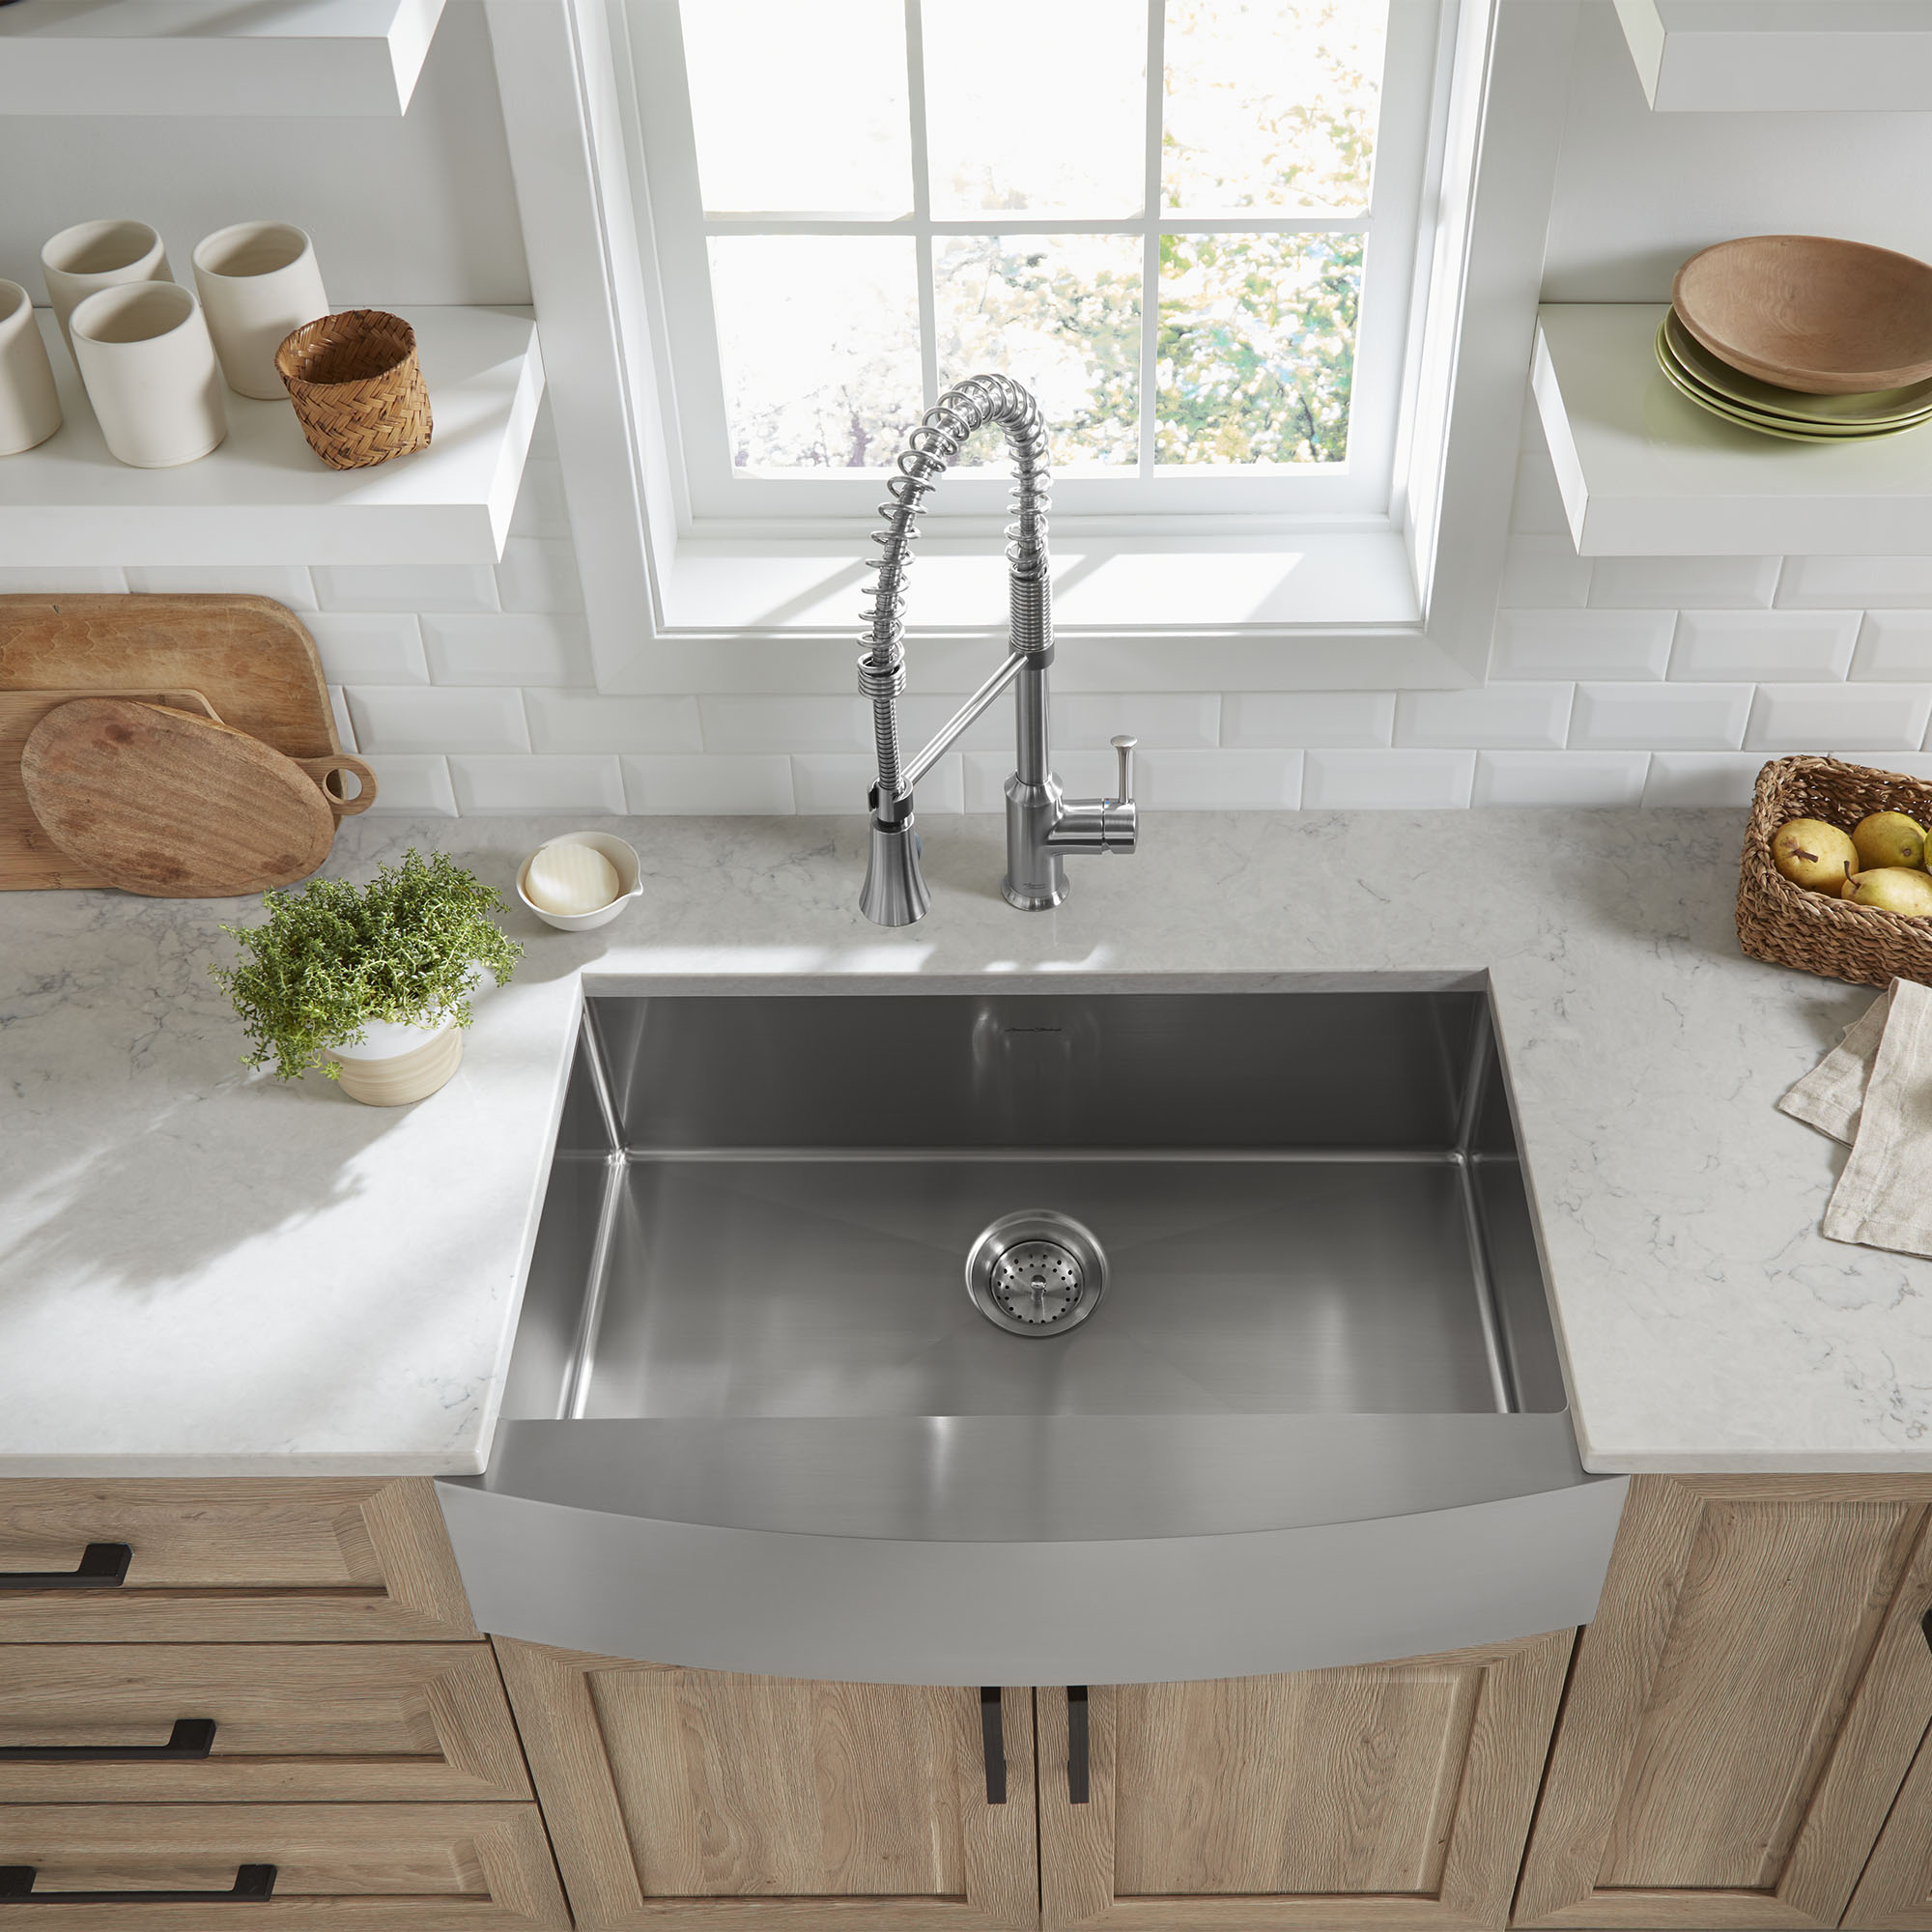 American Standard Pekoe Farmhouse/Apron-Front Stainless Steel 33 in. Single Bowl Kitchen Sink - image 5 of 6